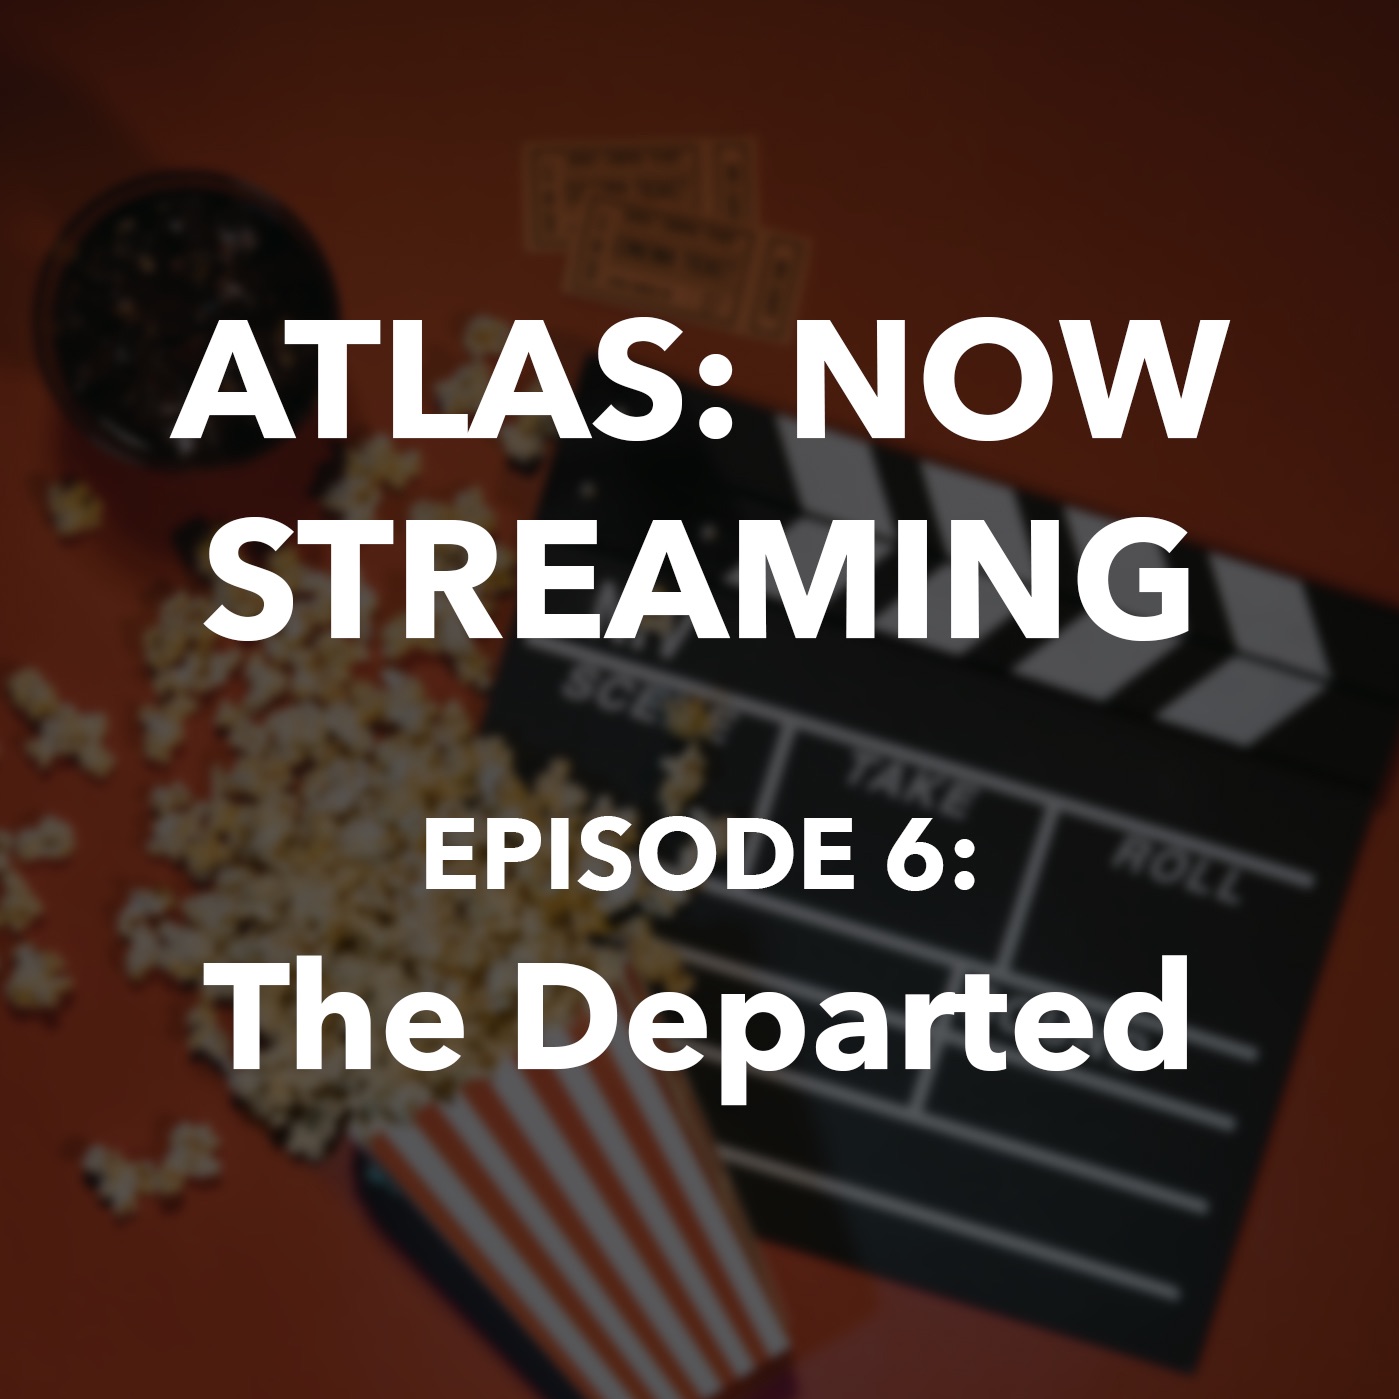 Atlas: Now Streaming Episode 6 - The Departed